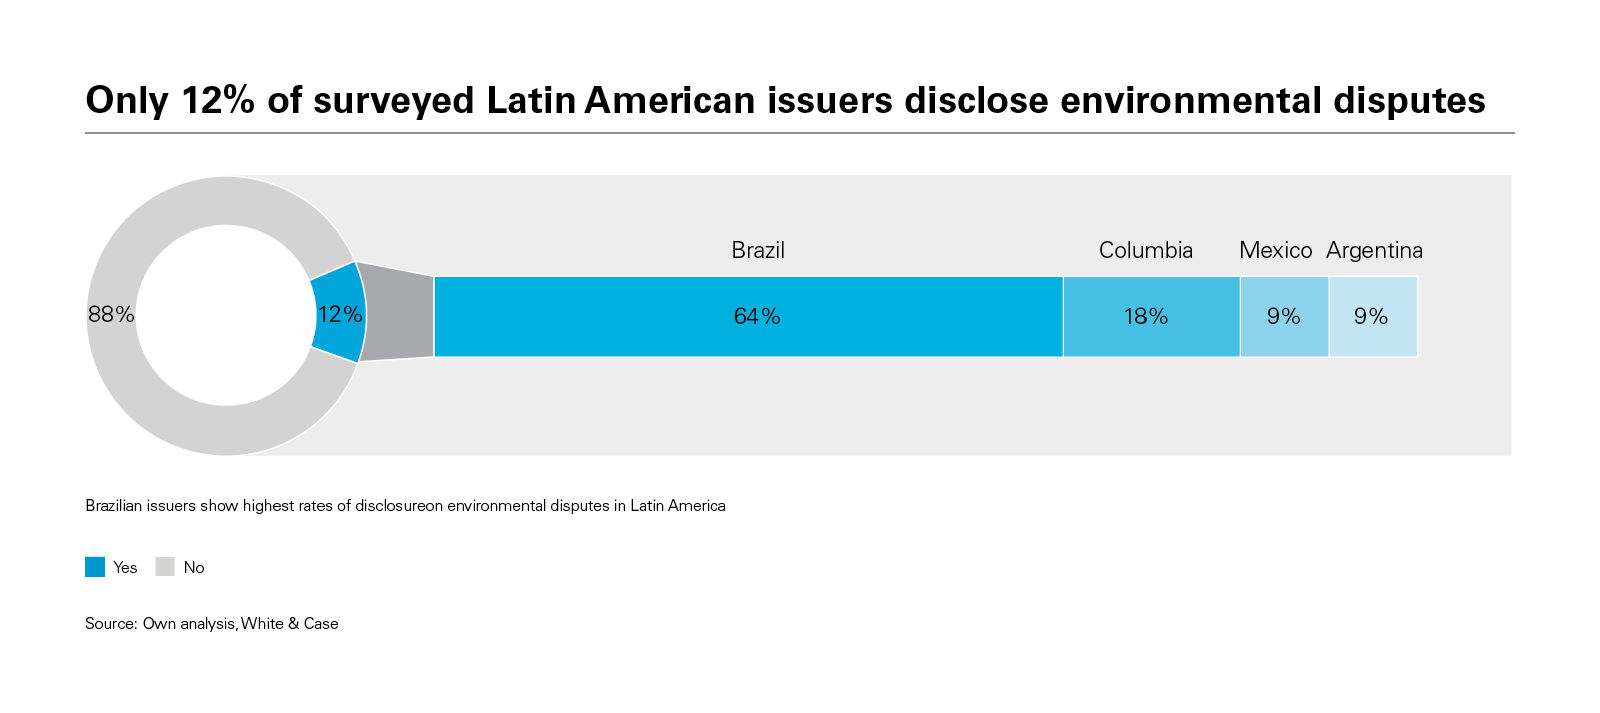 Only 12% of surveyed Latin American issuers disclose environmental disputes 